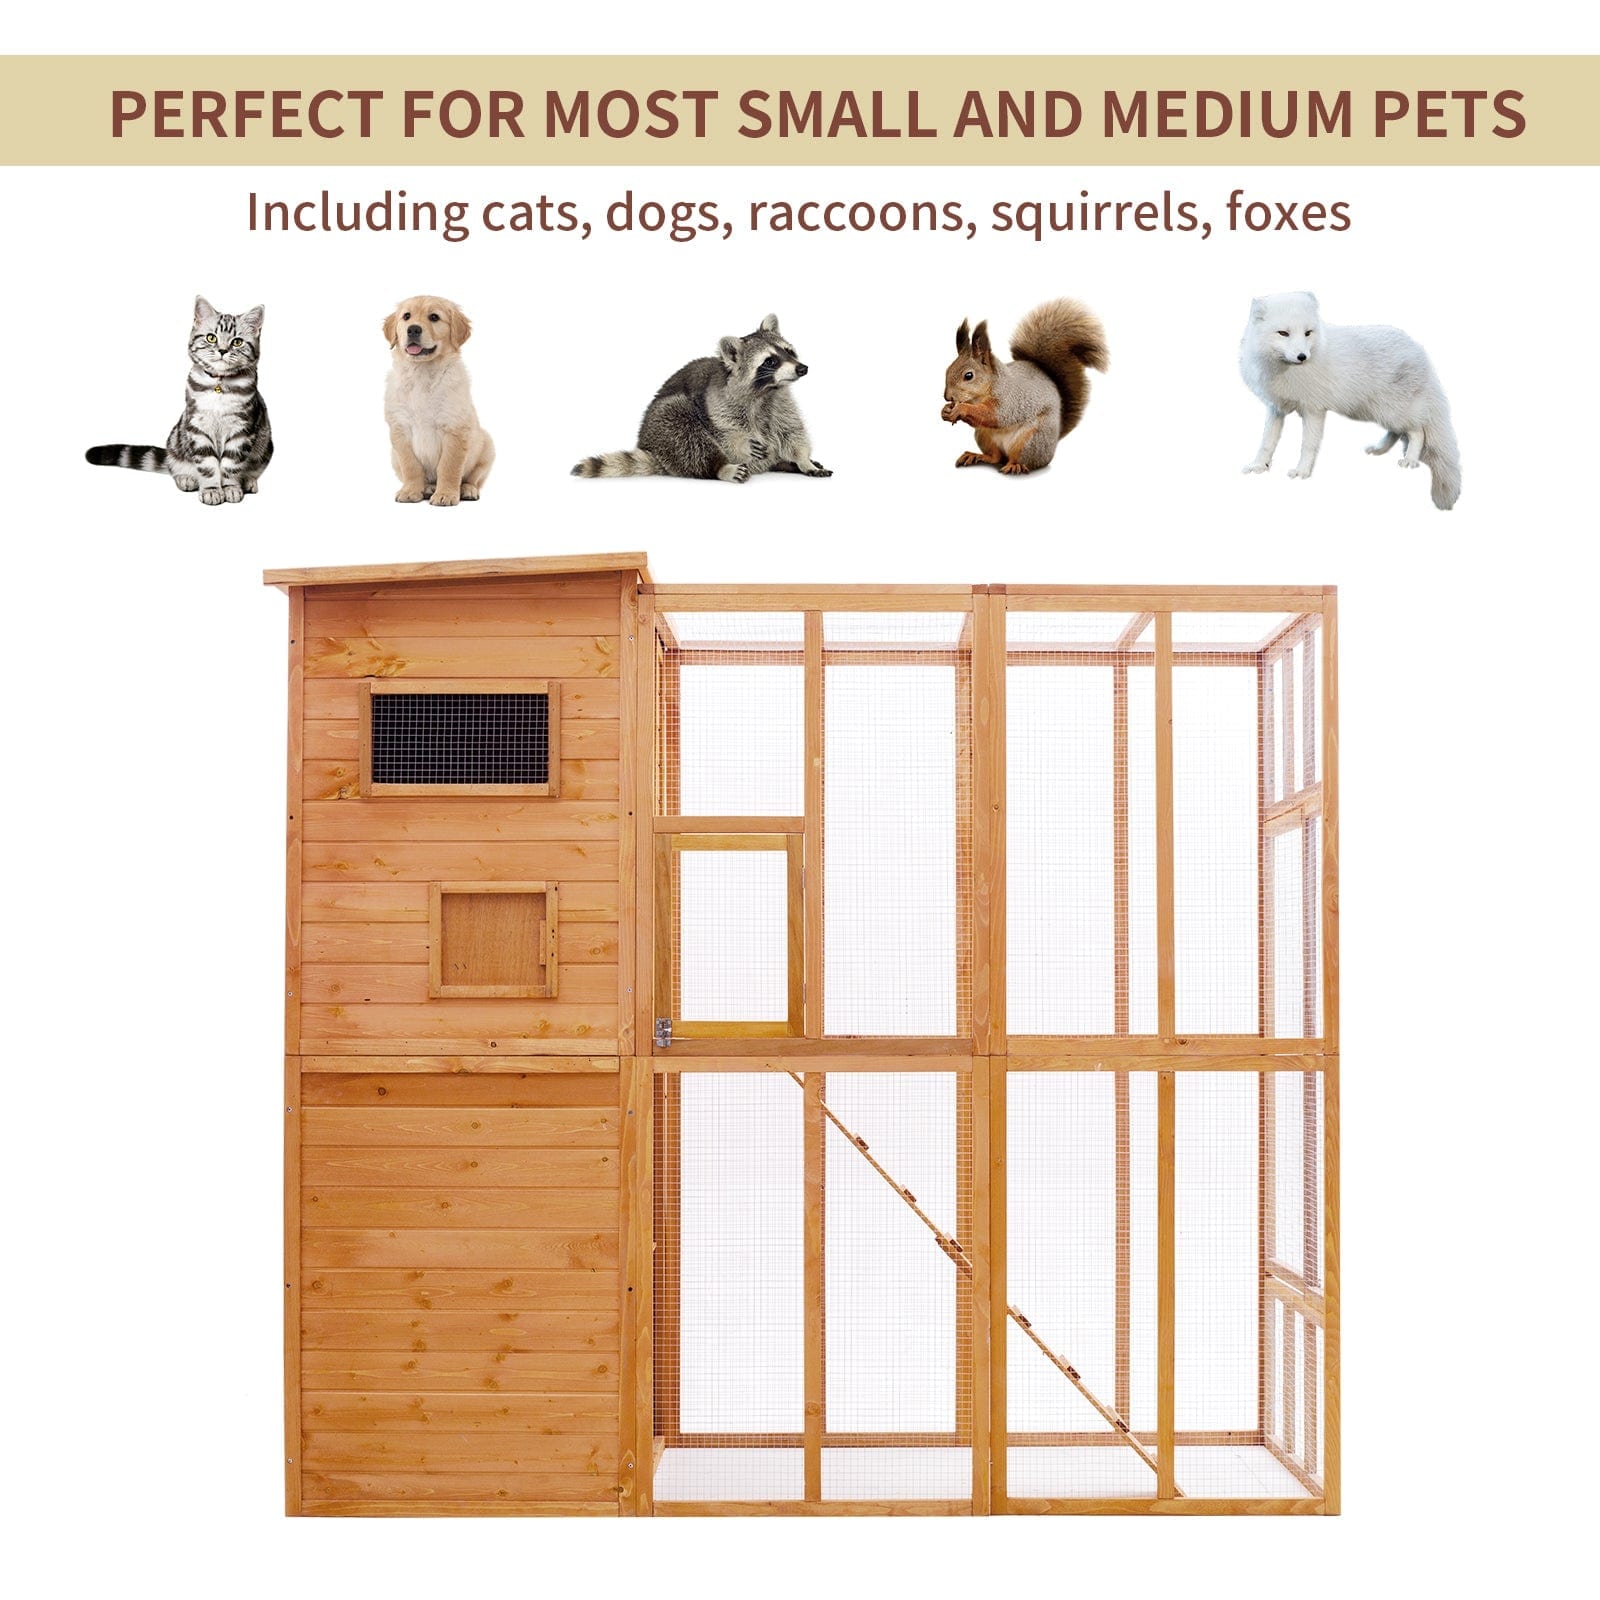 Elecwish Cat House PE1002OR is perfect for most small and medium pets